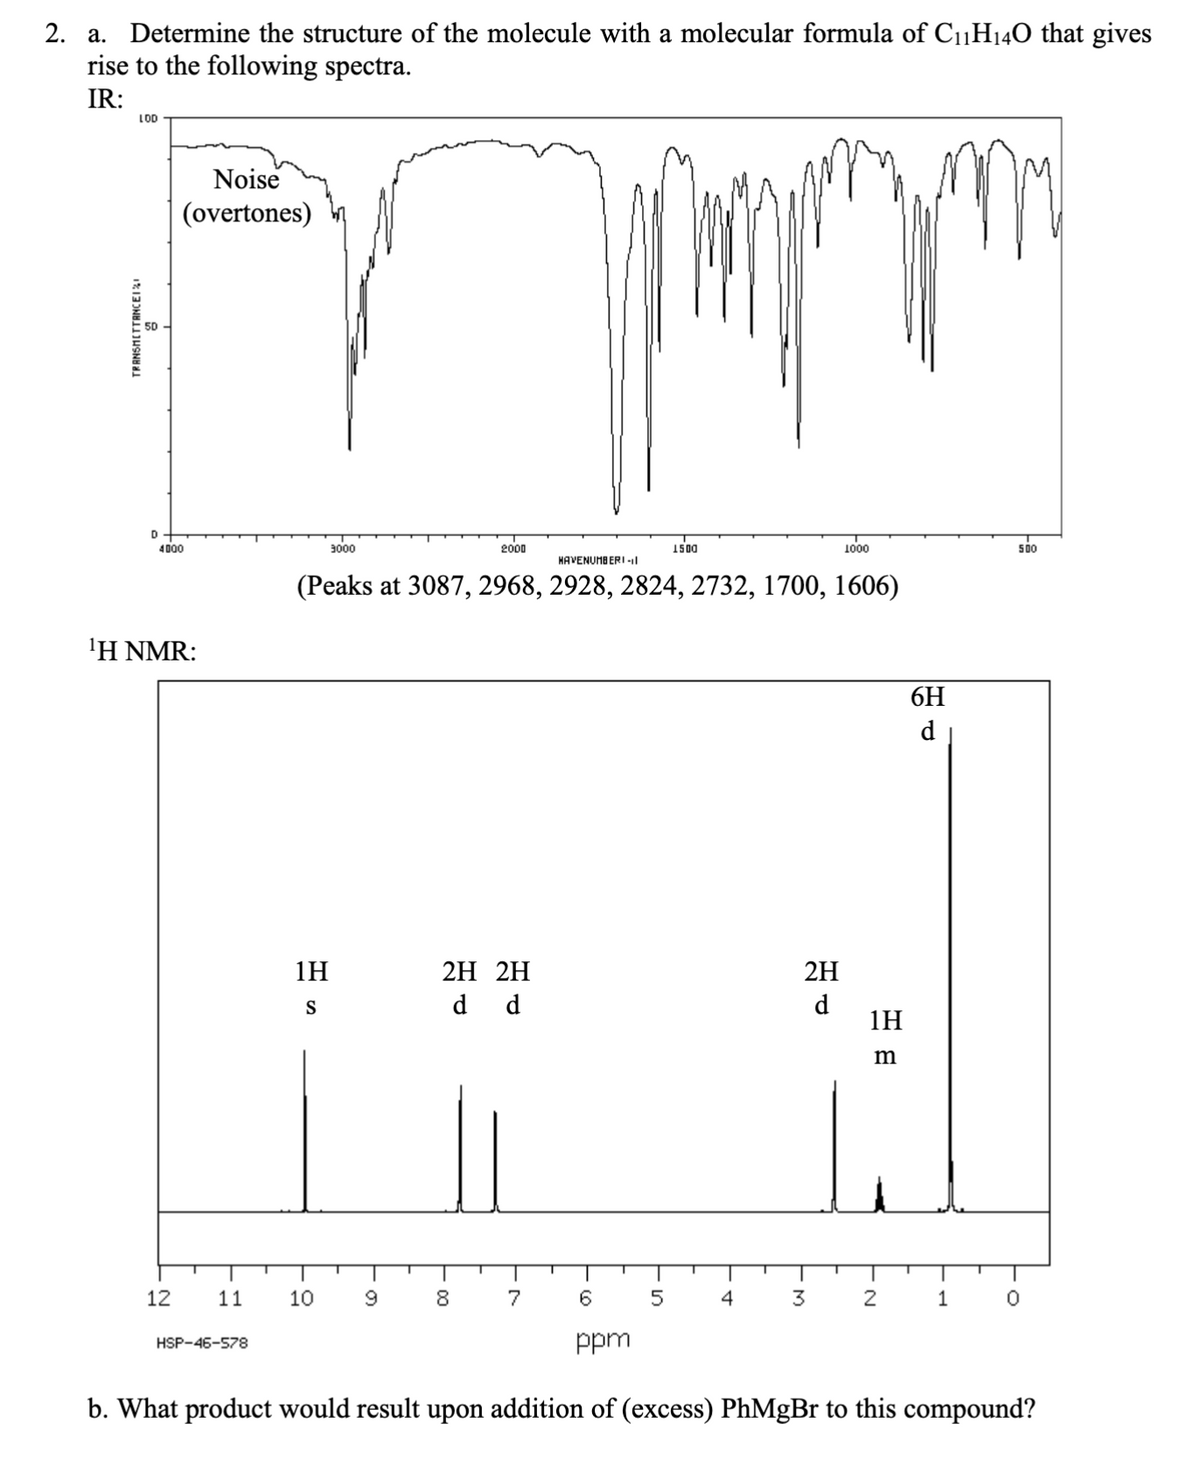 2. a. Determine the structure of the molecule with a molecular formula of C₁1H₁40 that gives
rise to the following spectra.
IR:
LOD
TRANSMITTANCEI
D
Noise
(overtones)
4000
¹H NMR:
12
11
HSP-46-578
1H
S
3000
10
HAVENUMBERI-11
(Peaks at 3087, 2968, 2928, 2824, 2732, 1700, 1606)
9
2000
2H 2H
d d
8
7
1500
5
4
2H
d
T
1000
3
1H
m
2
6H
d
1
500
6
ppm
b. What product would result upon addition of (excess) PhMgBr to this compound?
0